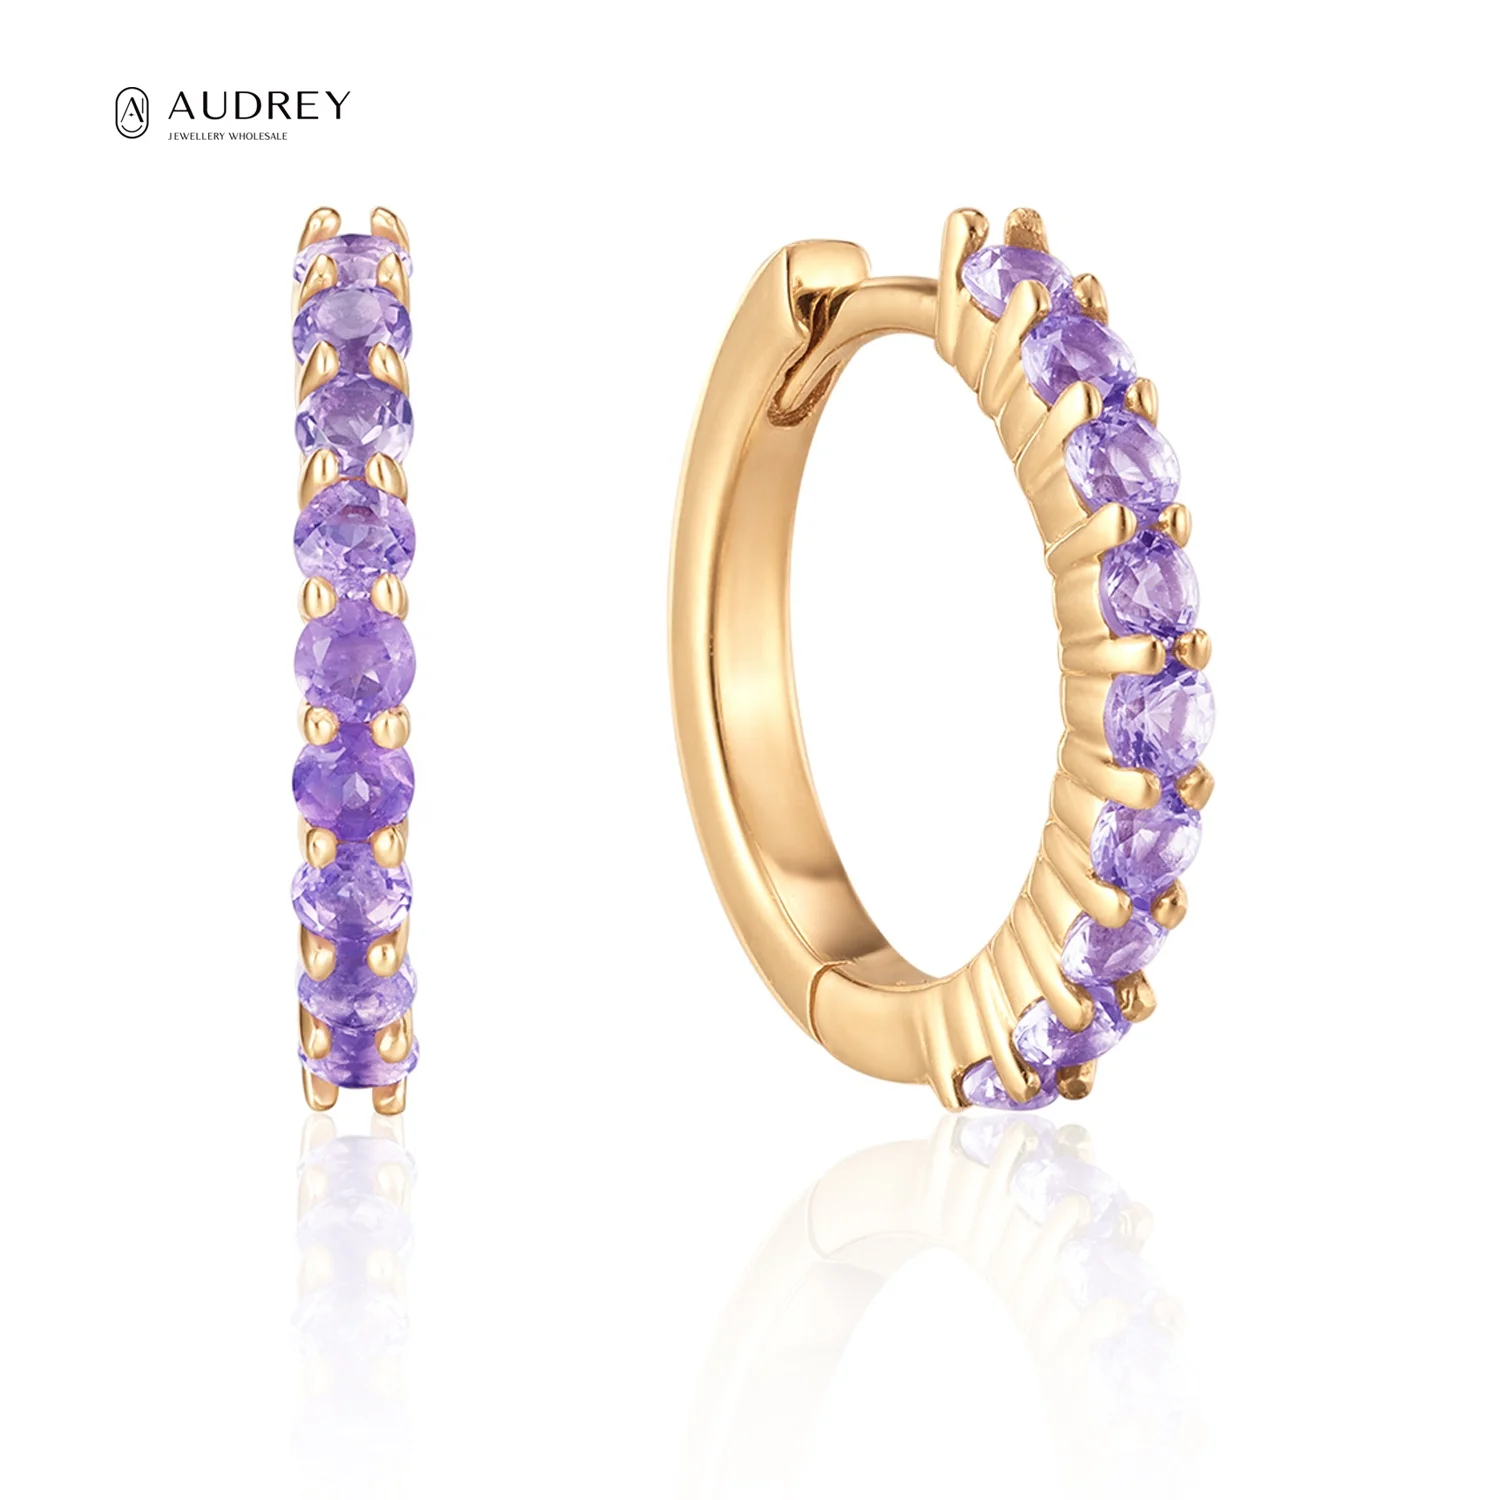 

Audrey Personalized February Birthstone Amethyst Stones Earrings Jewelry Real 14k Solid Gold Small Huggie Hoop Earring For Women